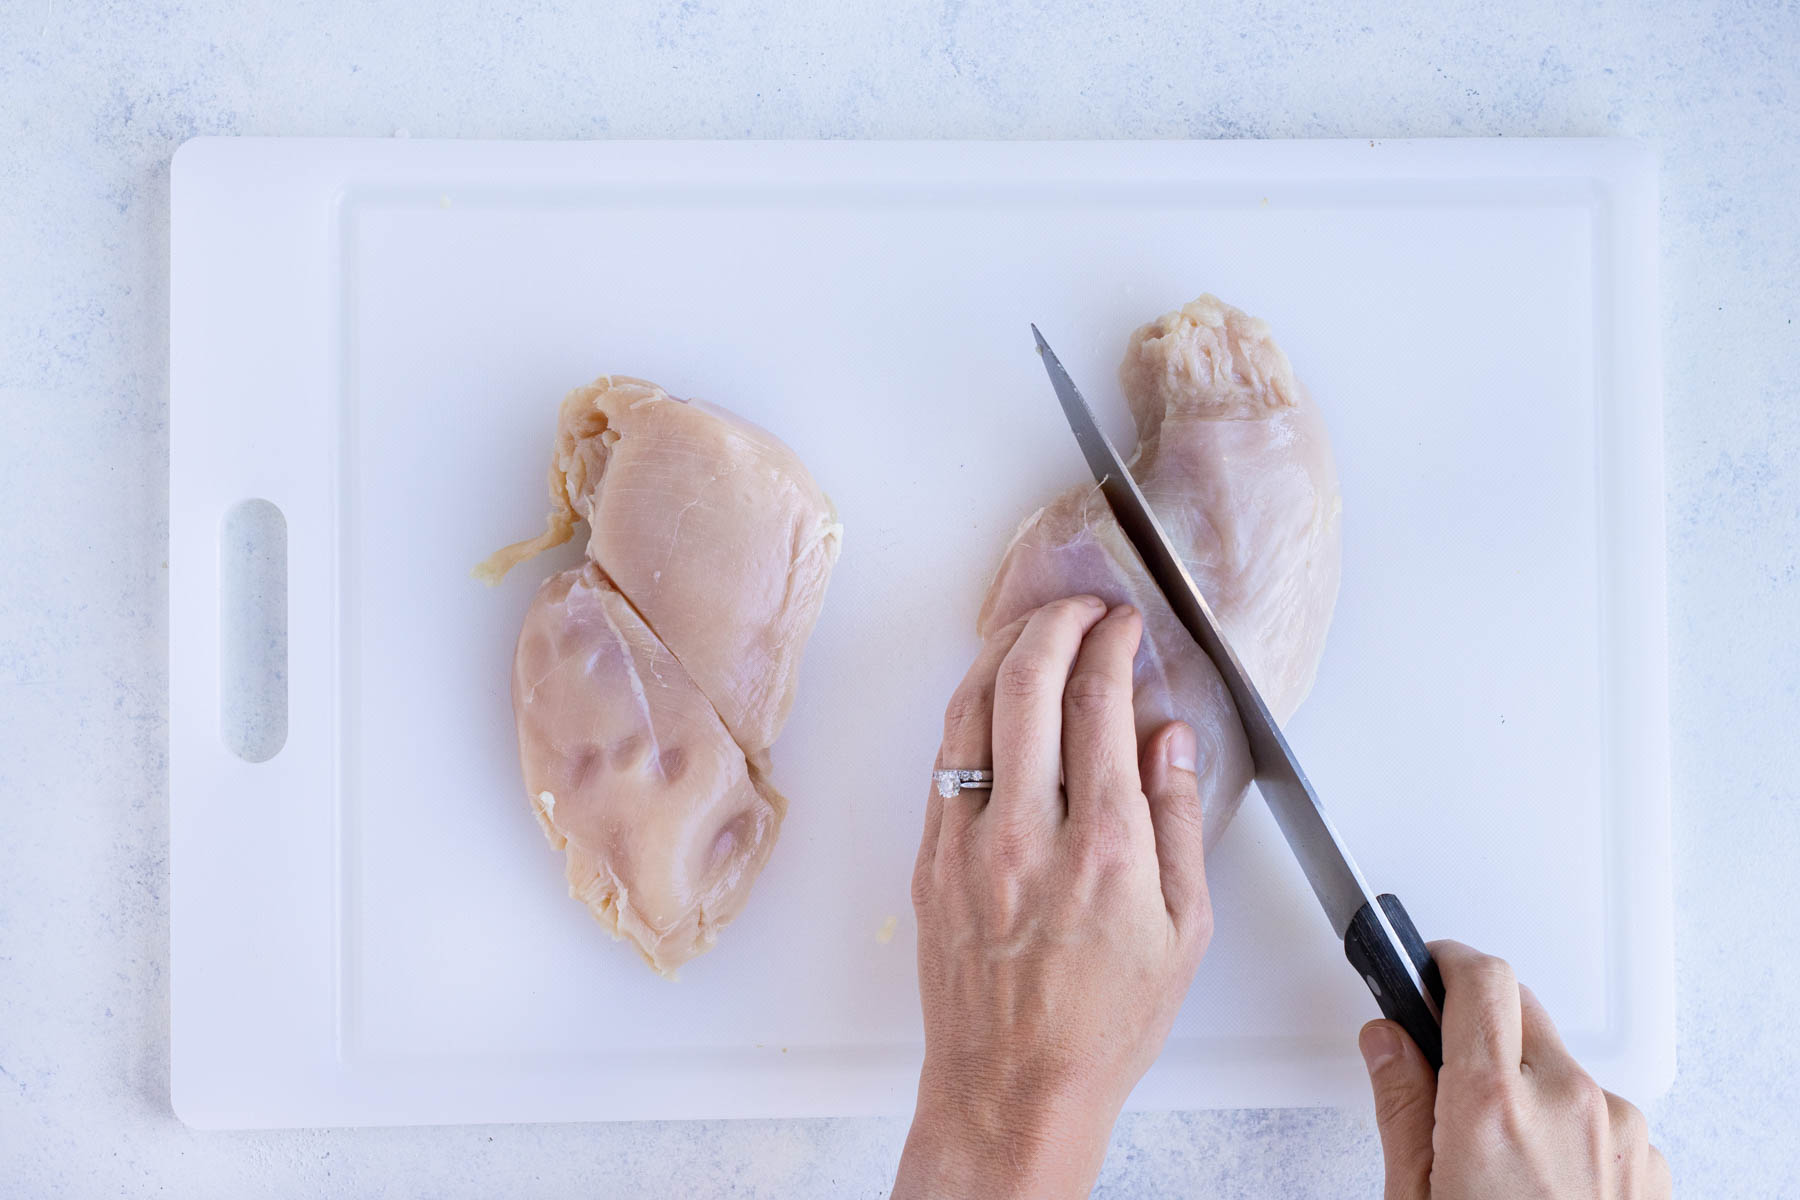 Two chicken breasts are cut in half.